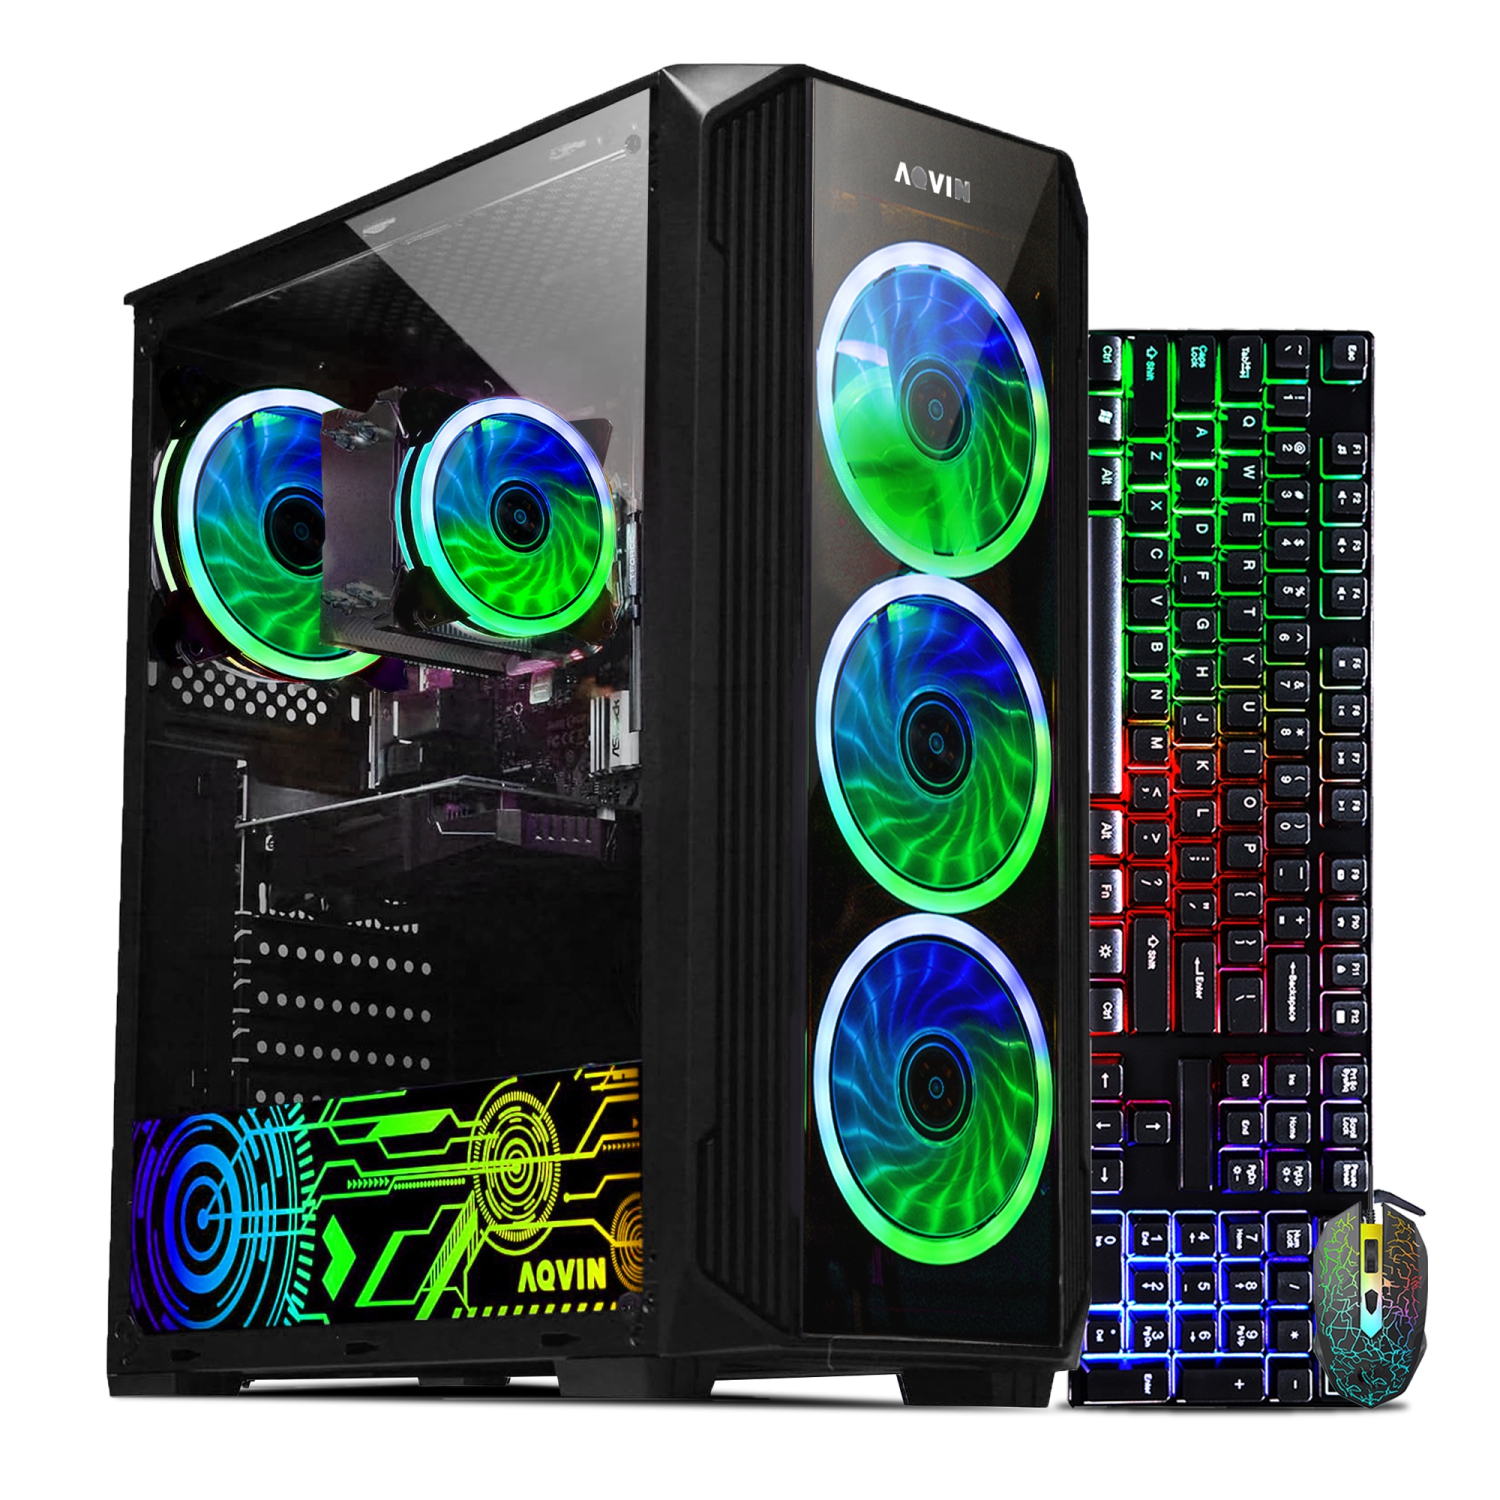 Refurbished(Excellent) Gaming PC AQVIN Desktop Computer Tower - Intel Core i7 up to 4.0 GHz 1TB SSD 32GB DDR4 RAM, Radeon RX 580 8GB, Windows 10 Pro - Only at Best Buy